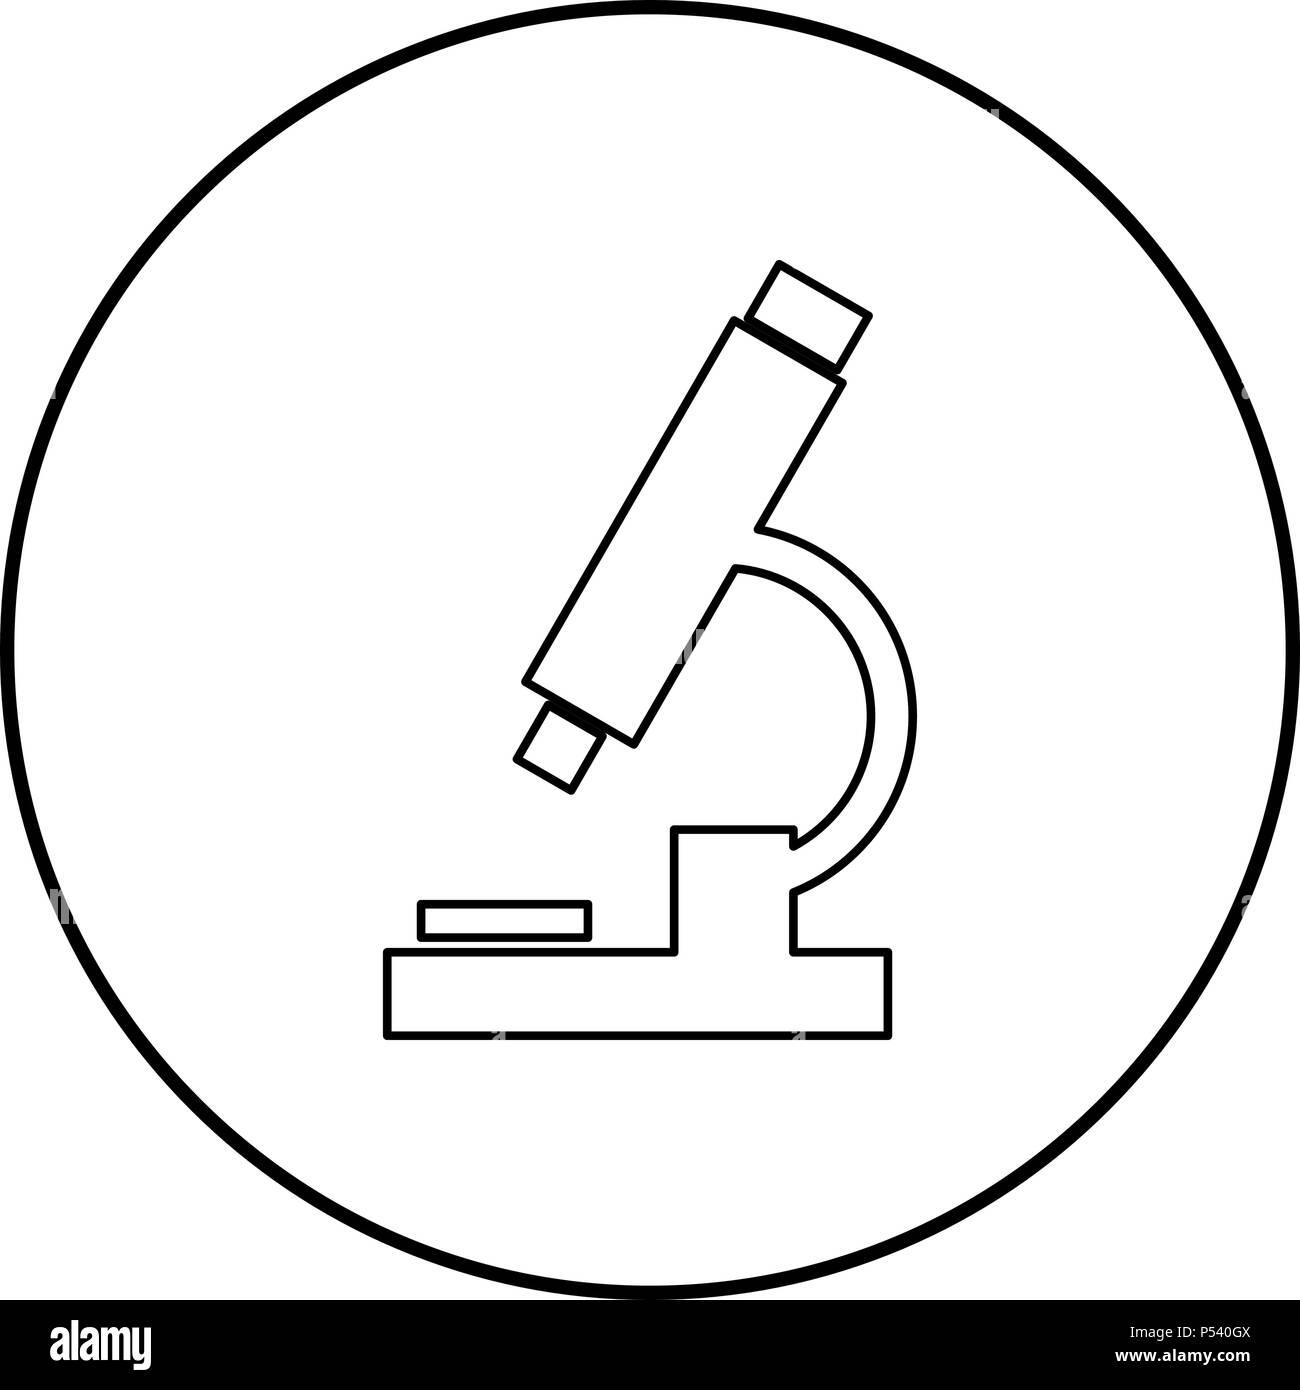 Microscope icon black color in circle round outline Stock Vector